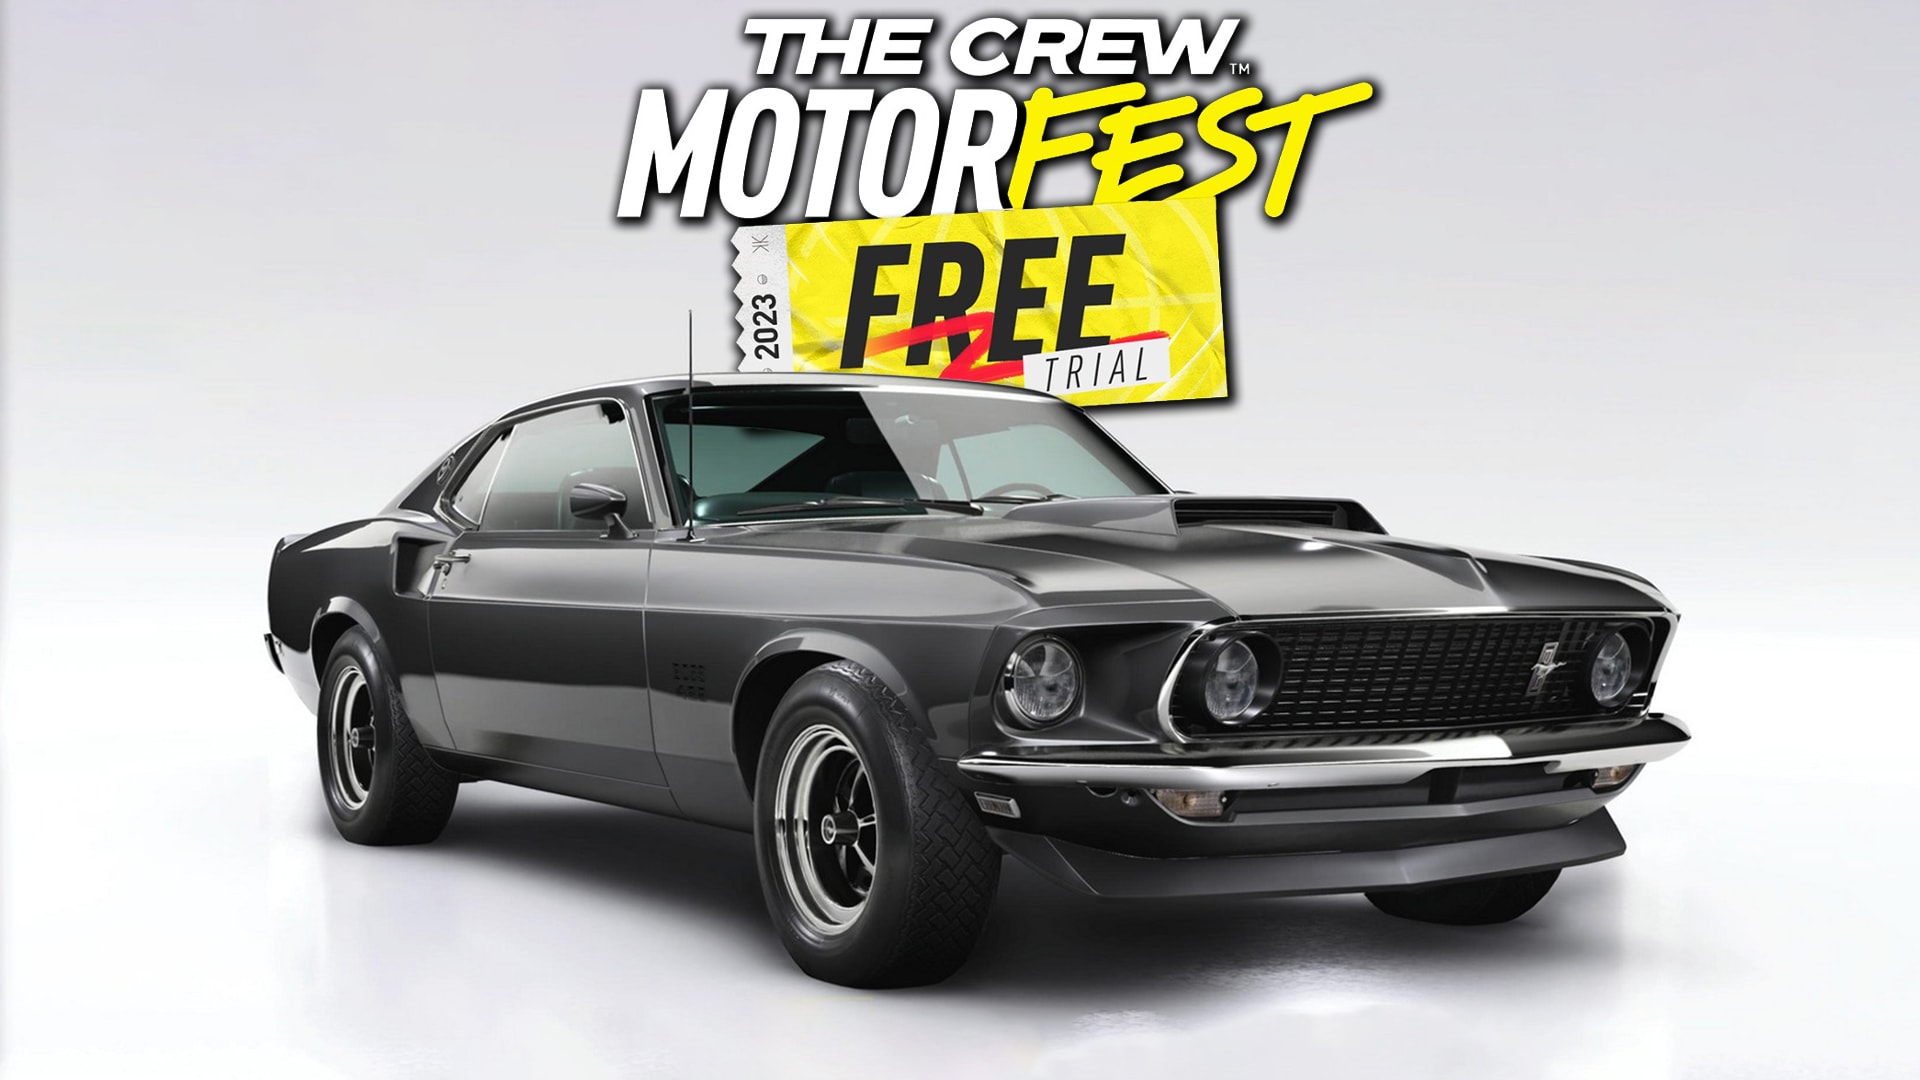 How to play The Crew Motorfest for free